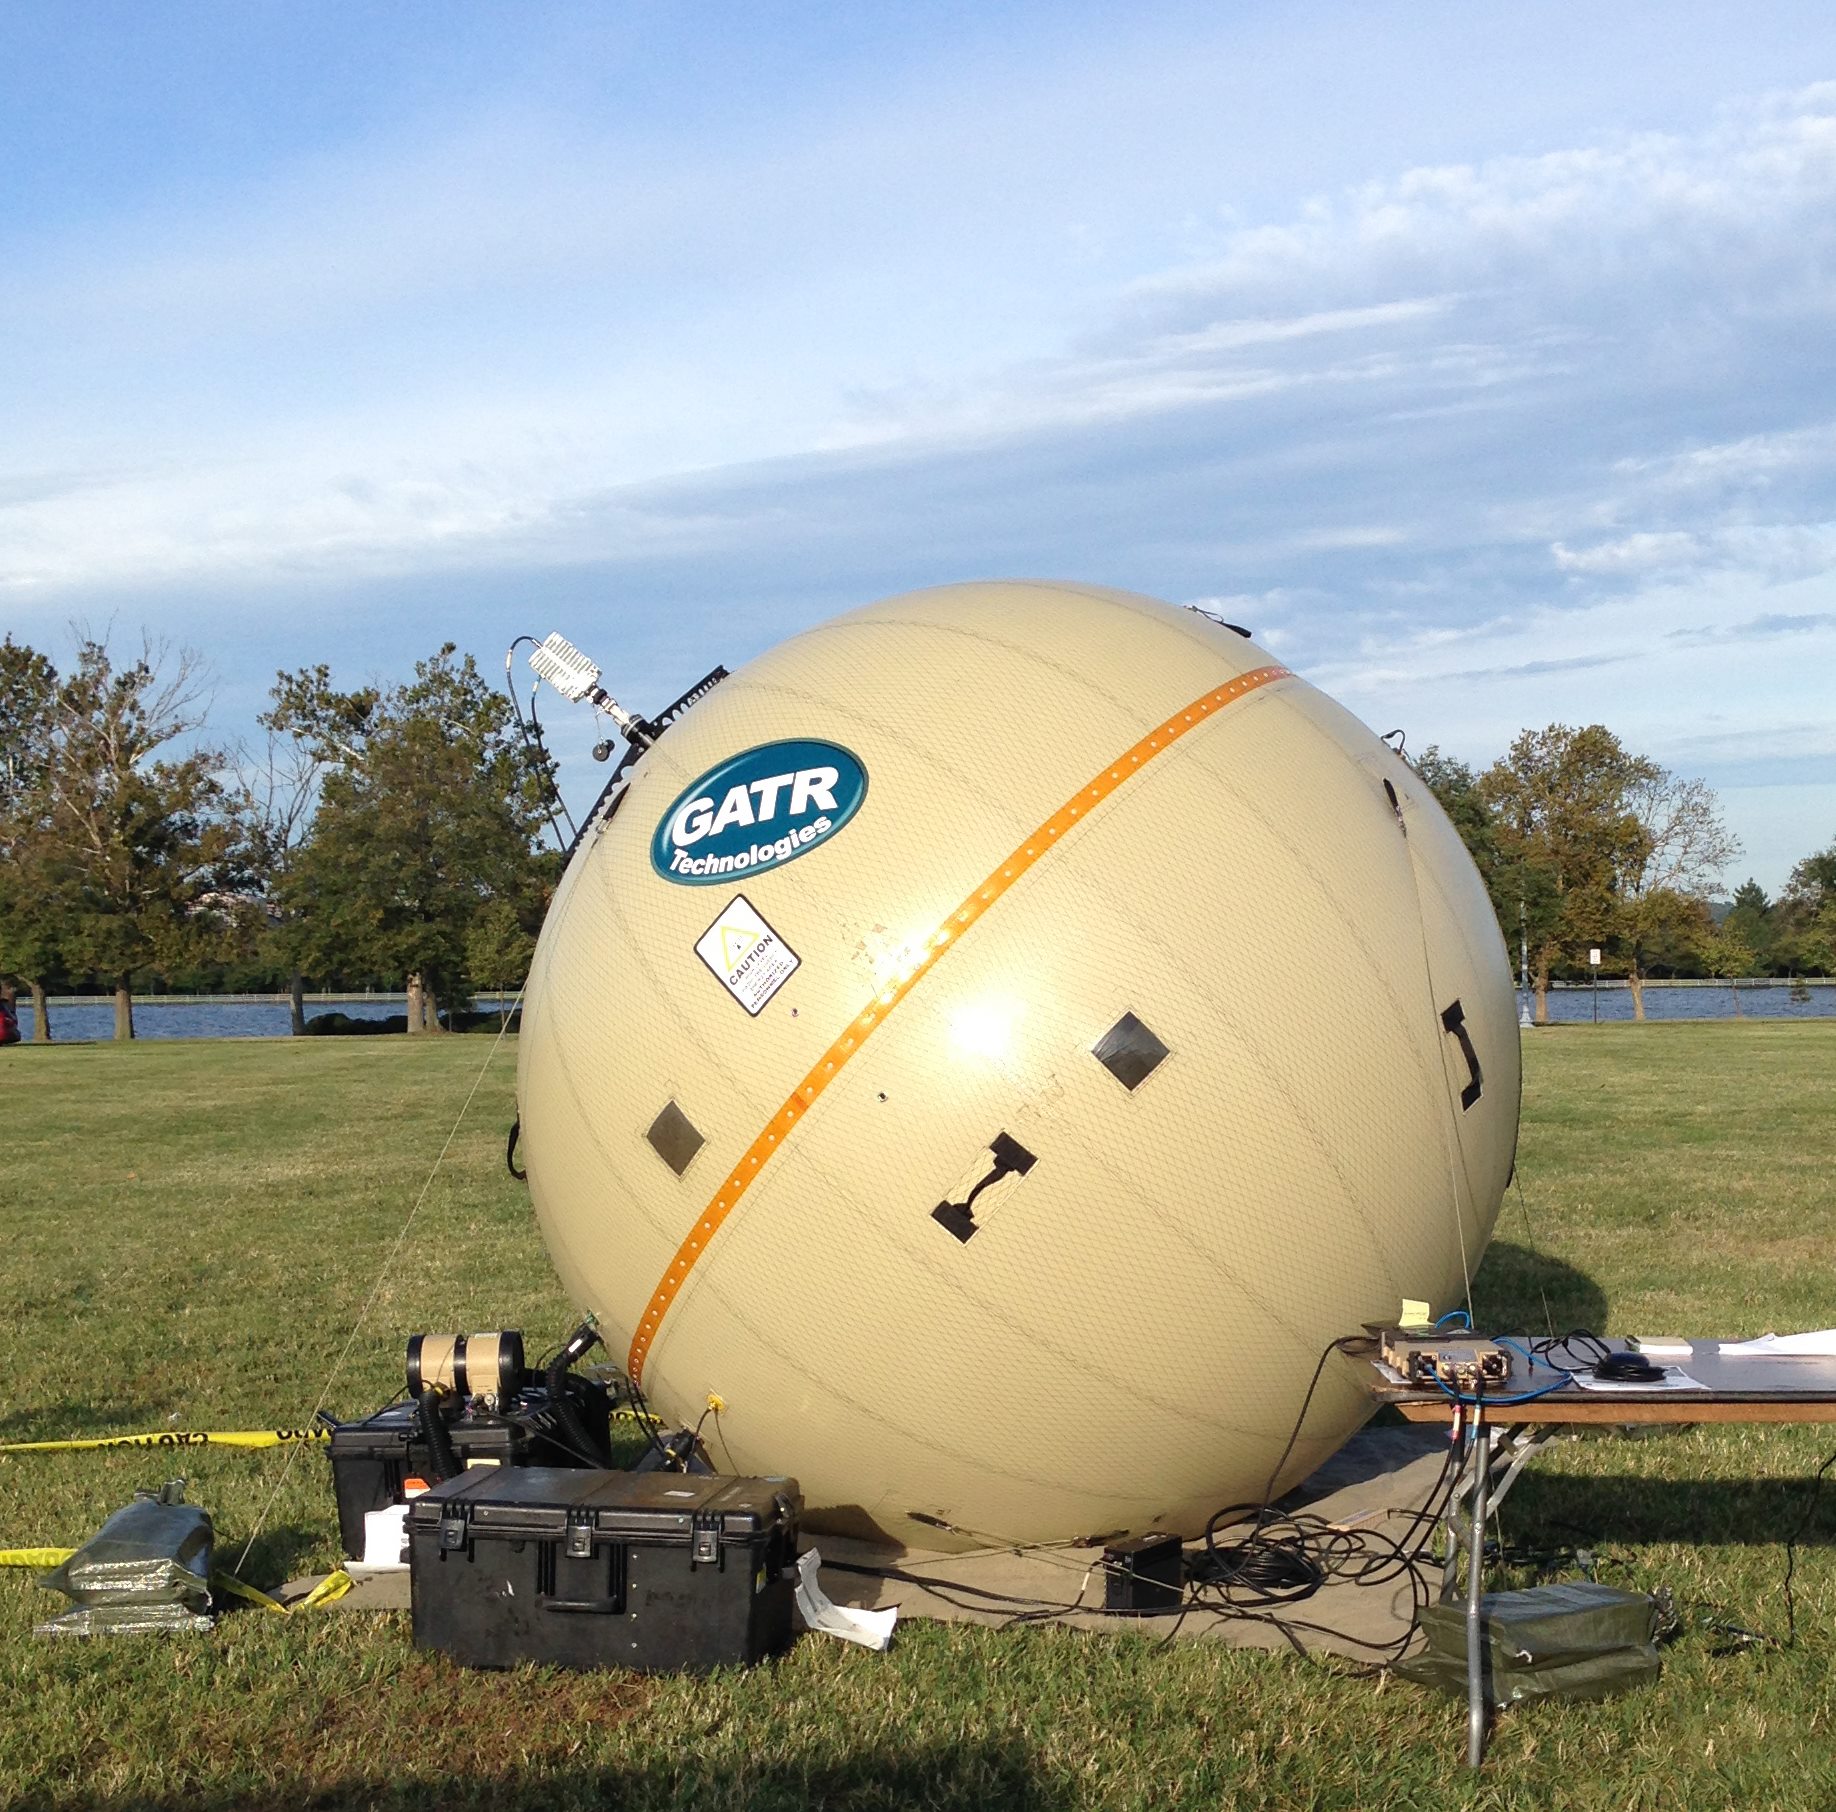 GATR Technologies ground-based inflatable antenna rests on the ground.